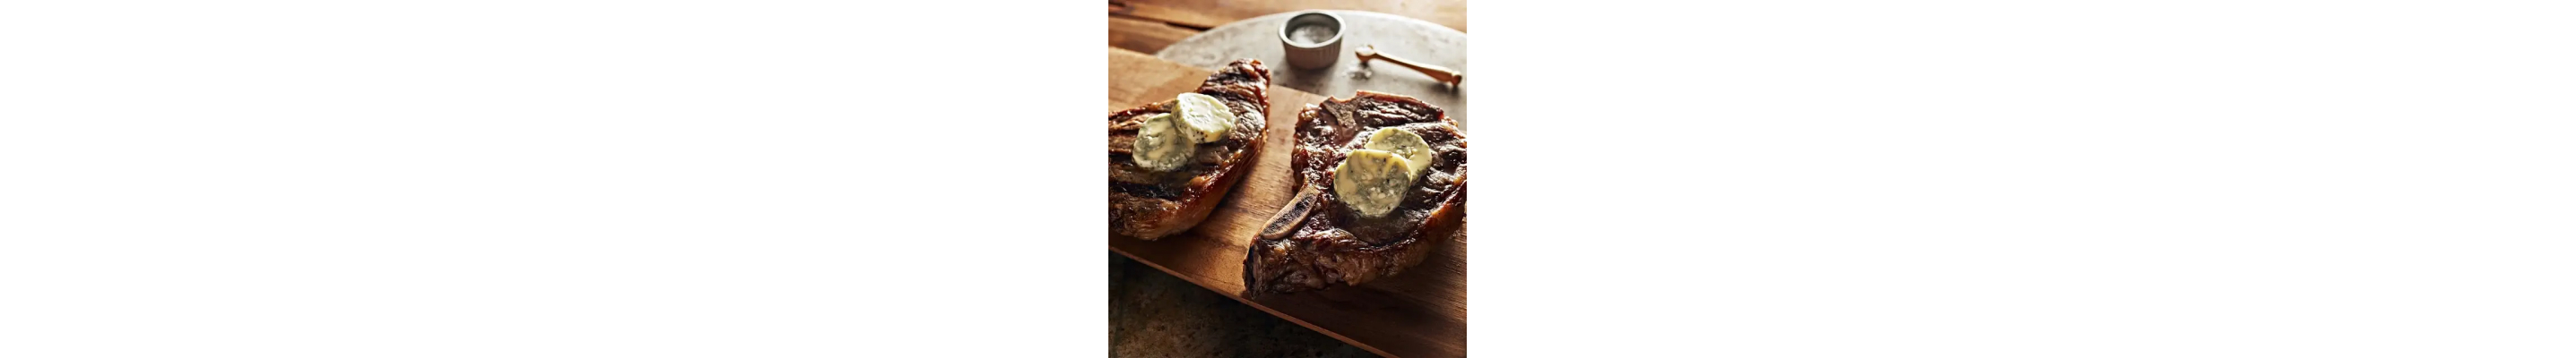 Two t-bone steaks with blue cheese butter